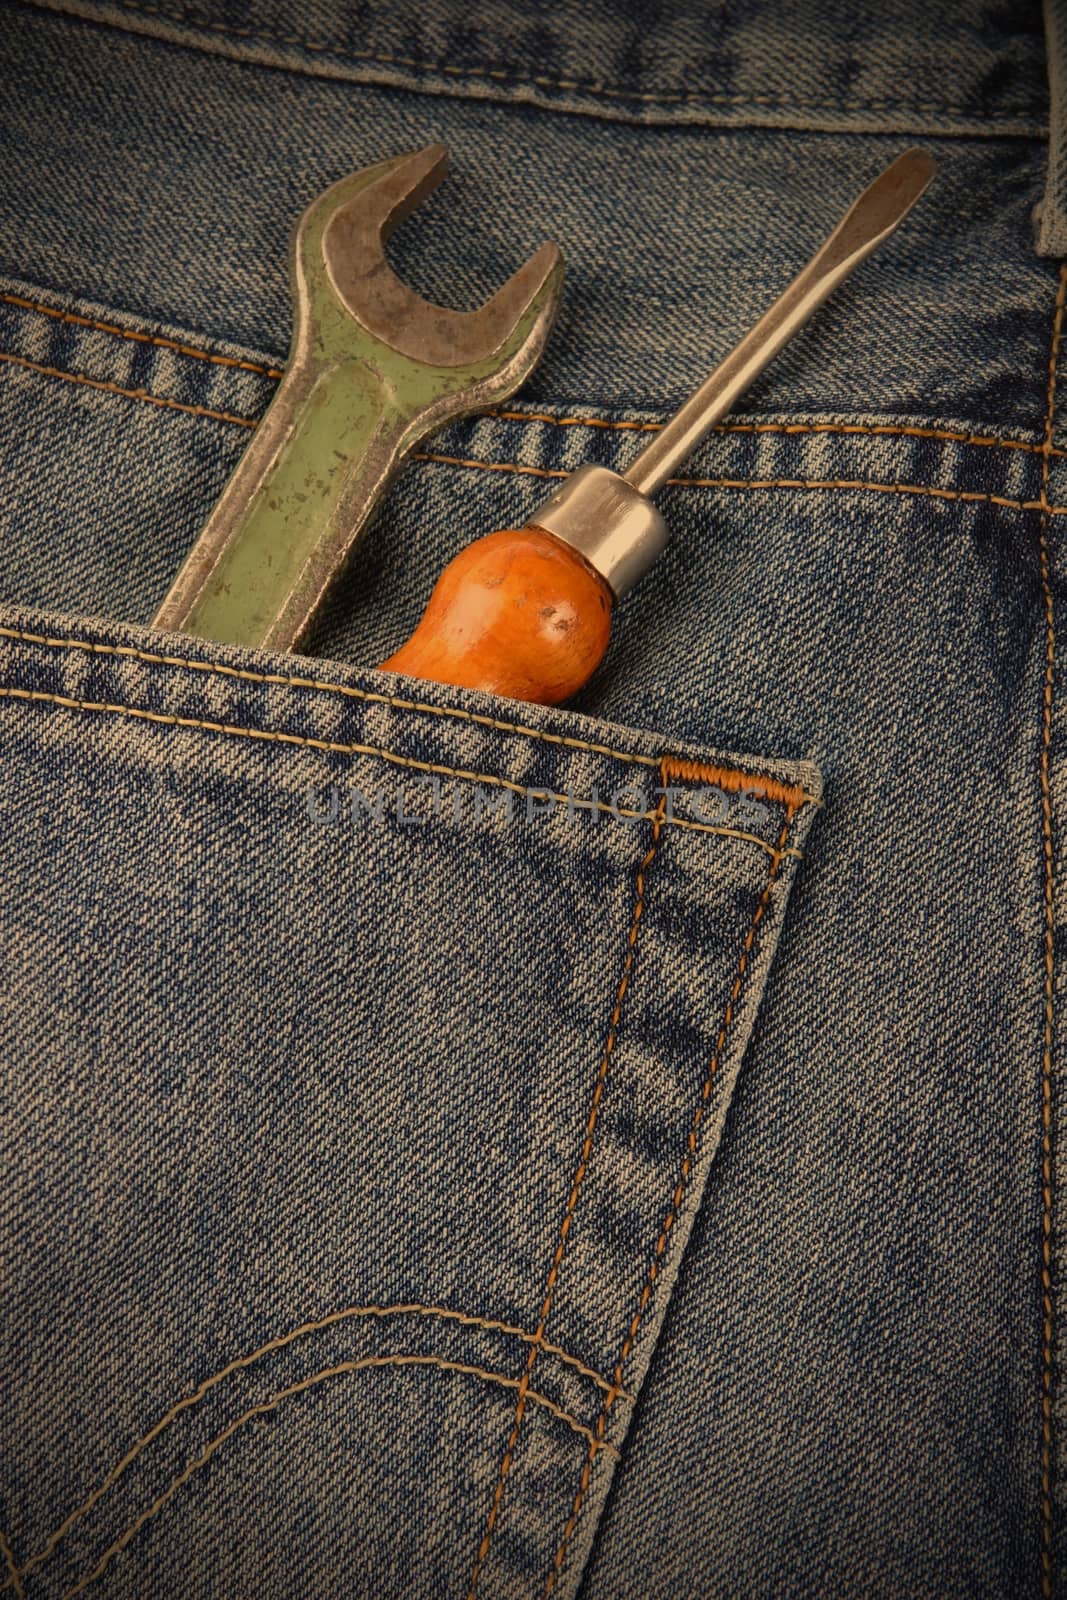 wrench and a screwdriver in his pocket jeans workers by Astroid